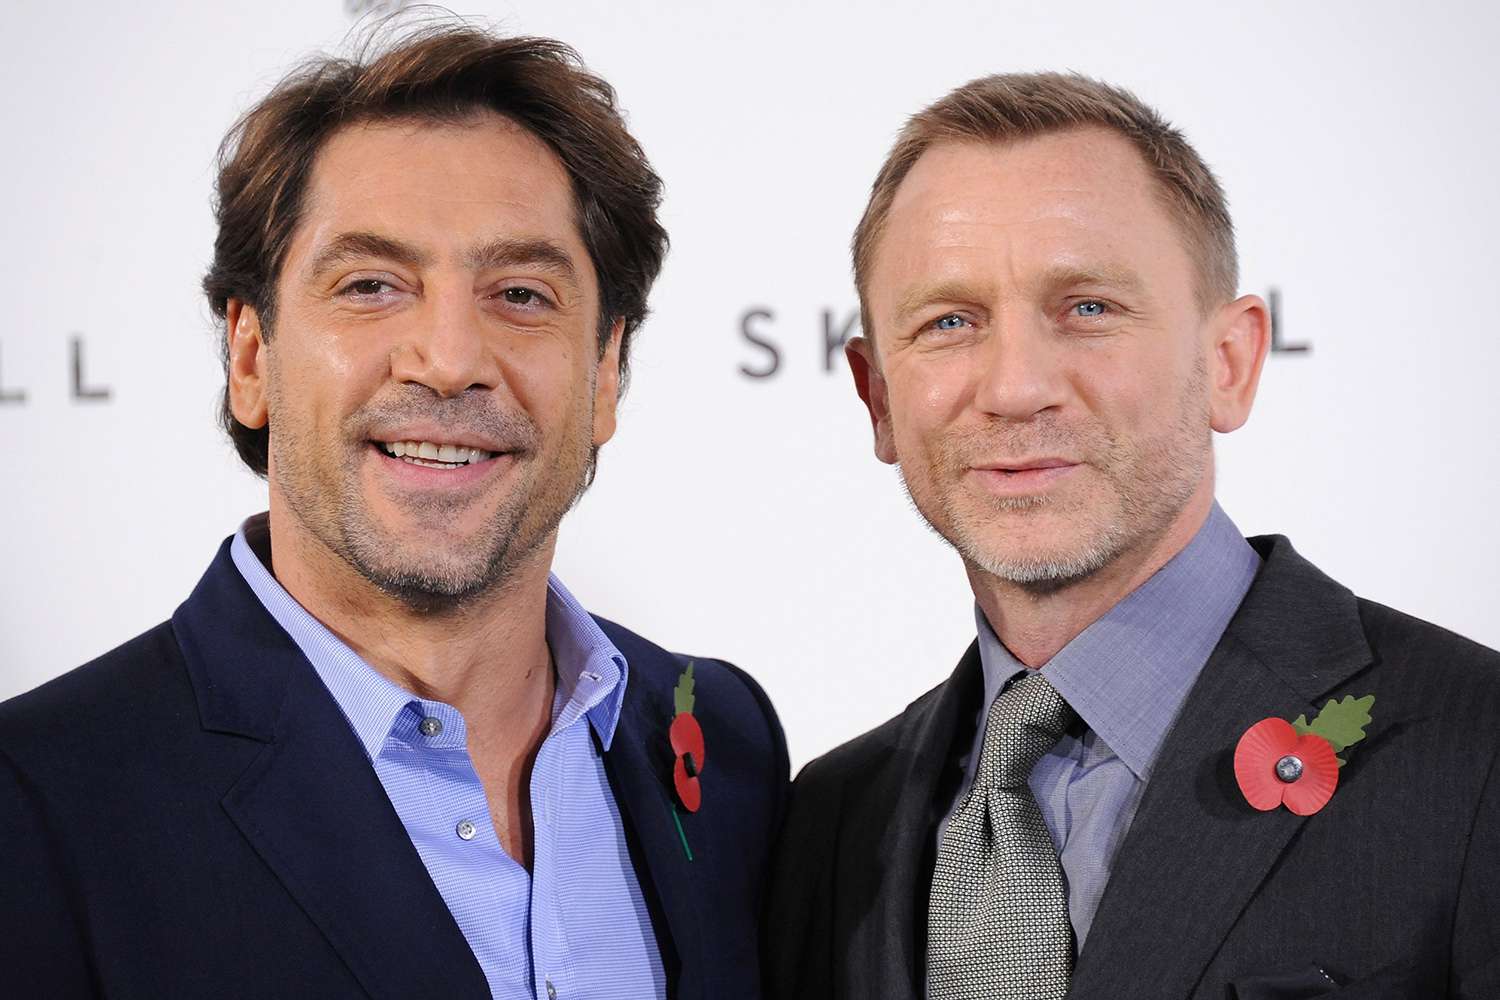 Javier Bardem Once Jumped Out of a Cake 'Dressed Like a Bond Girl' for Daniel Craig's Birthday